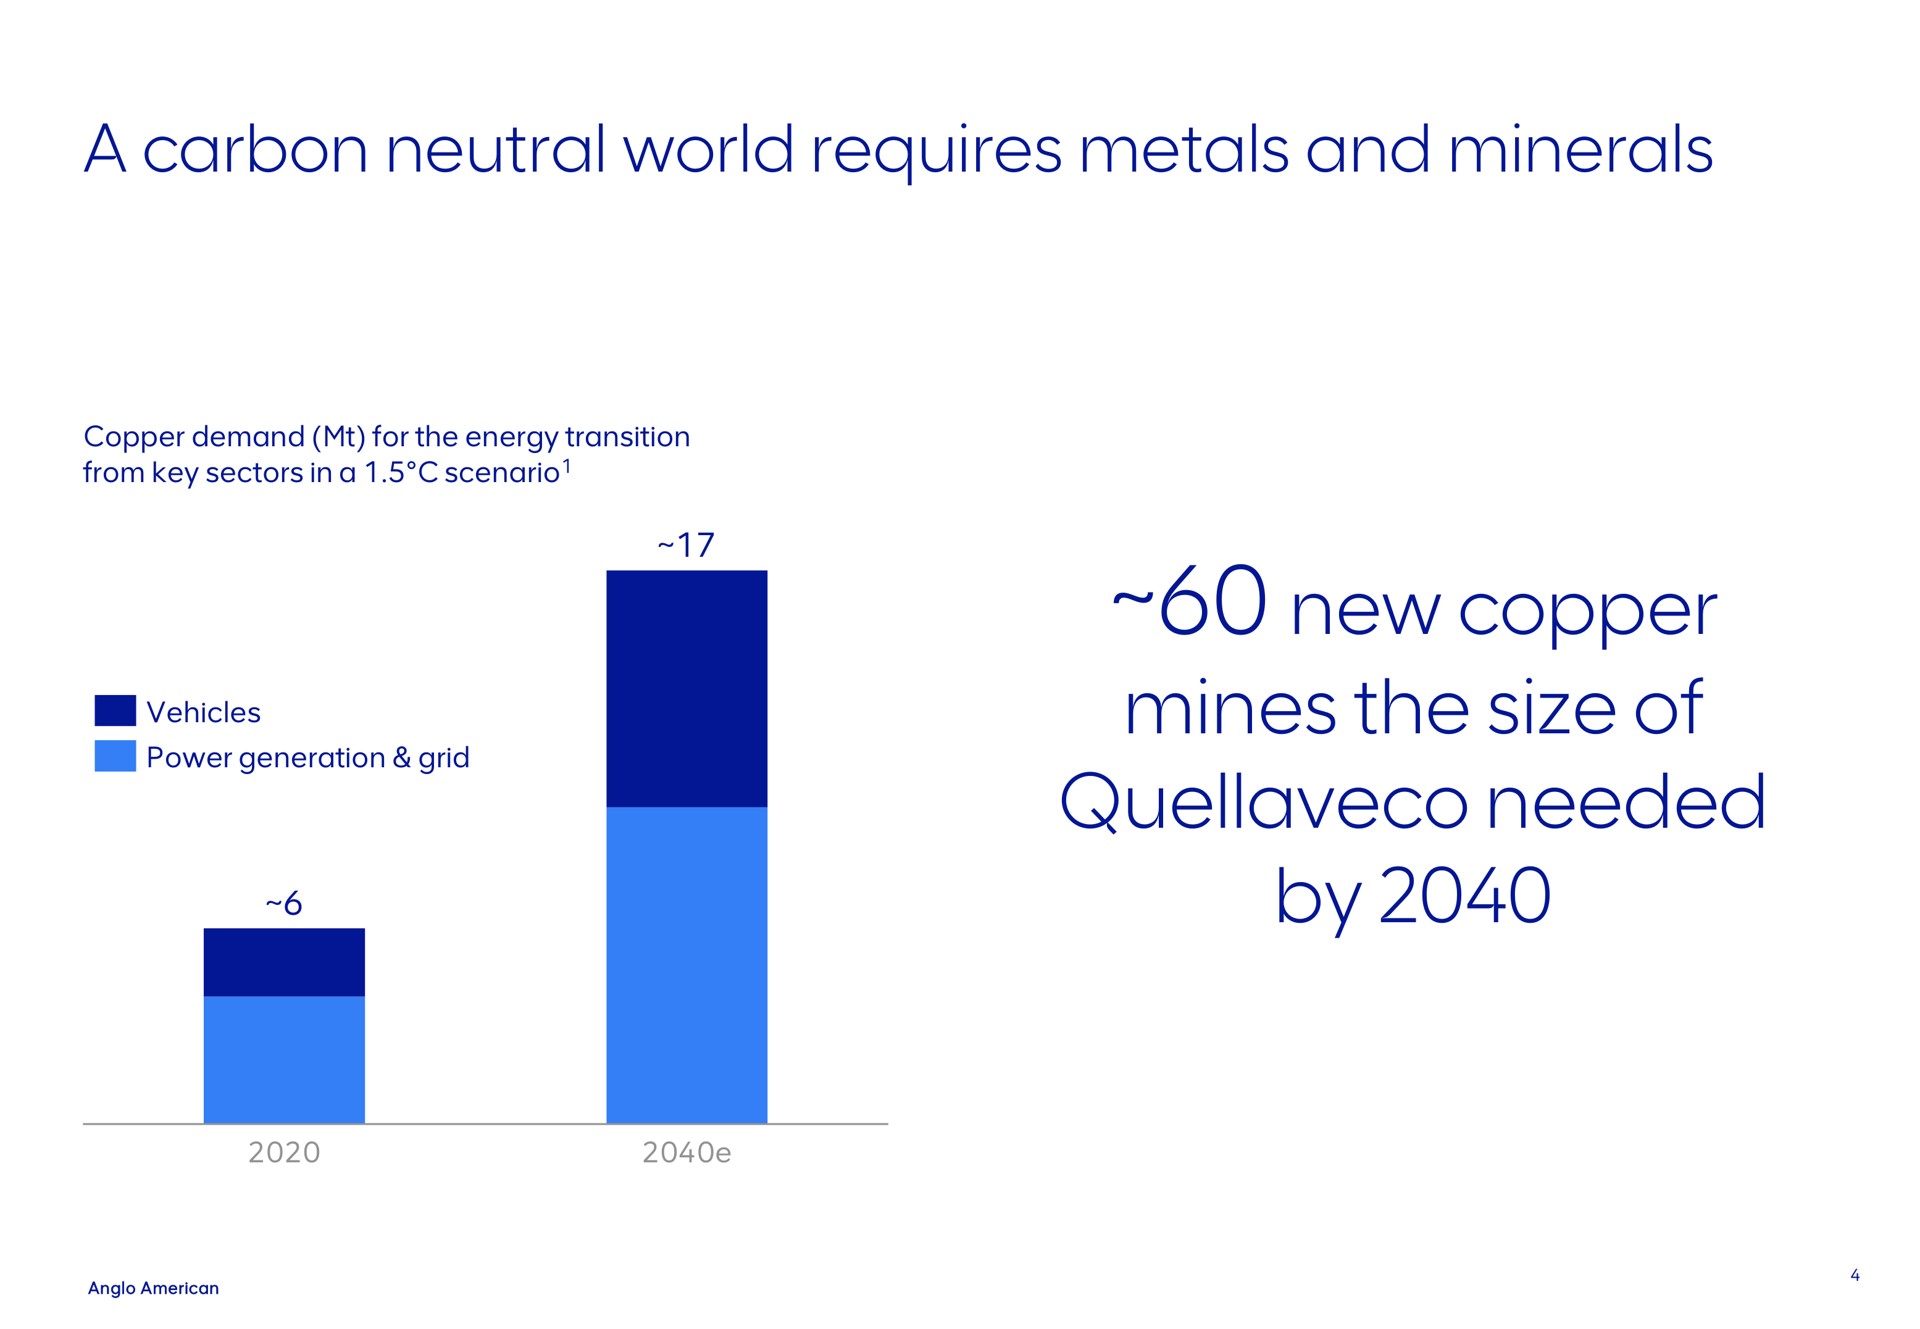 a carbon neutral world requires metals and minerals new copper mines the size of needed by | AngloAmerican